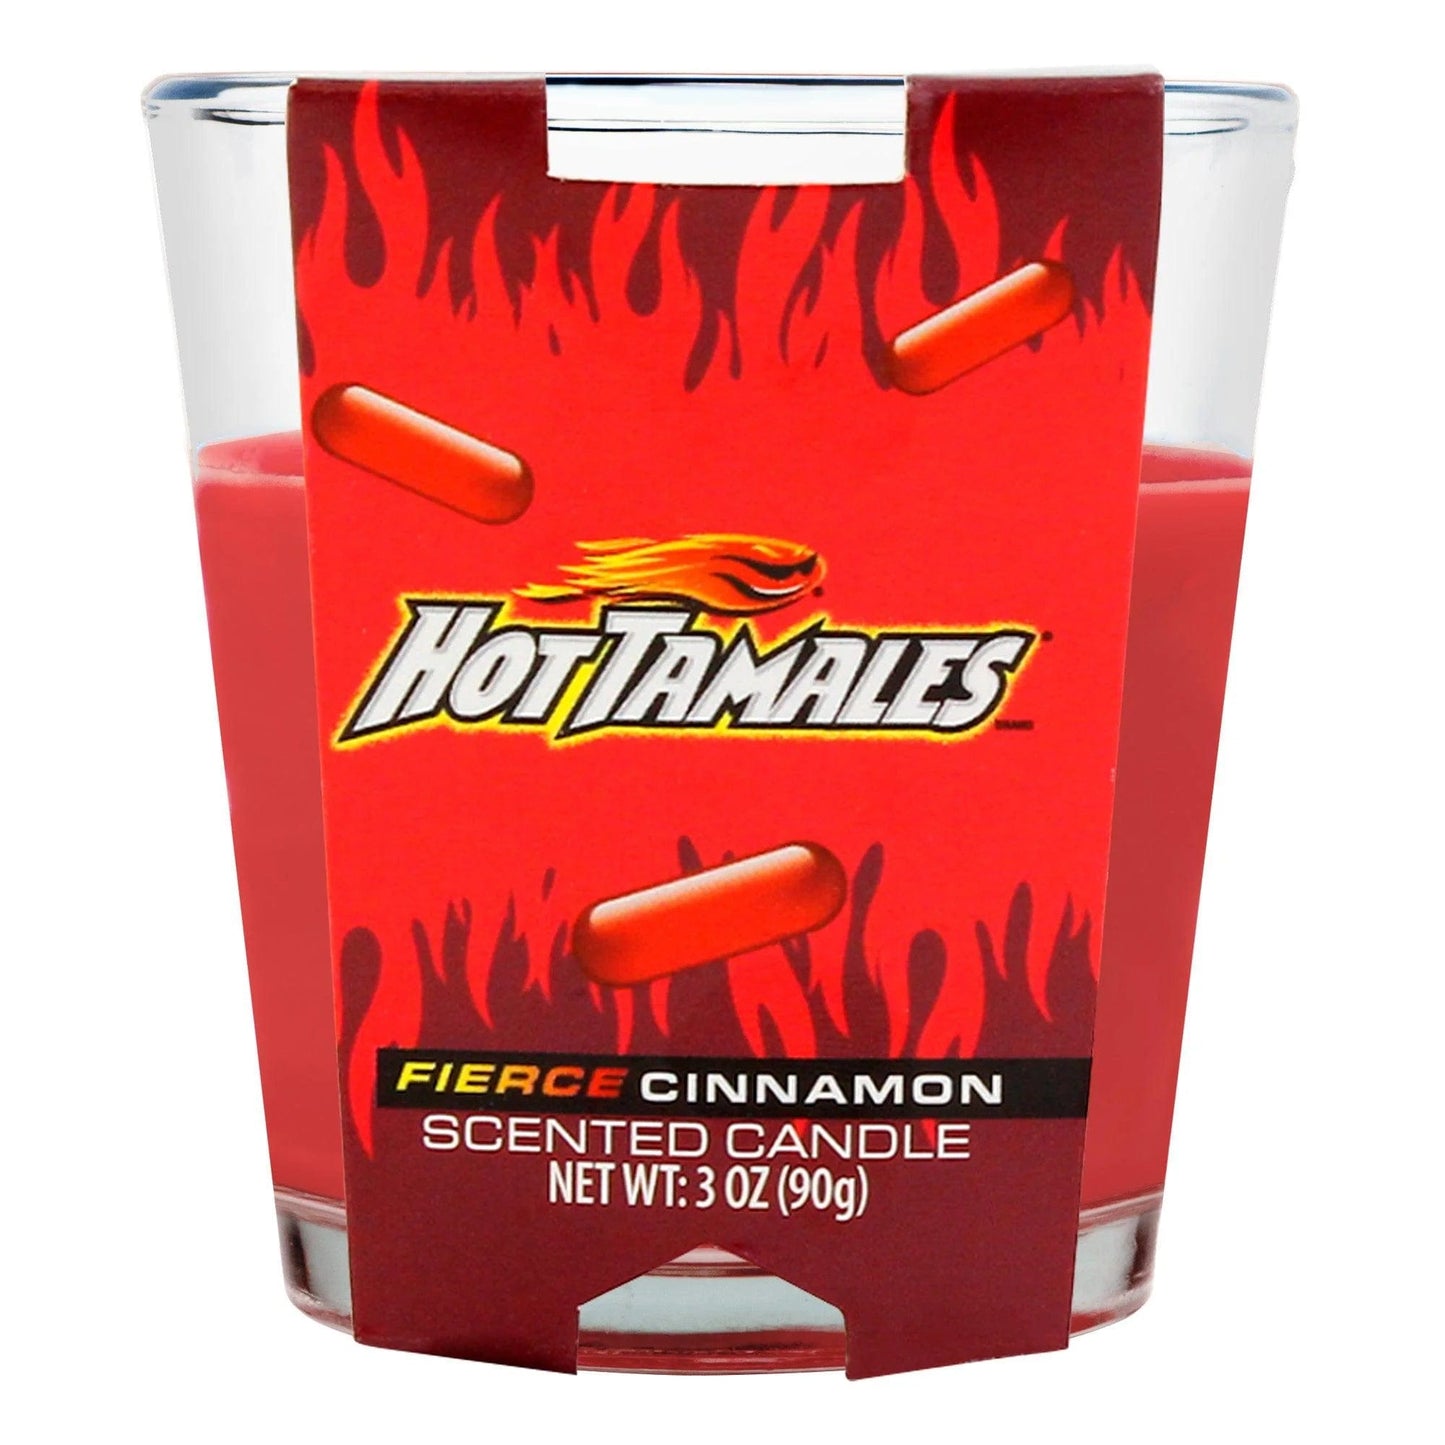 Sweet Tooth Candles Hot Tamales Fierce Cinnamon 3oz Candy Scented Candles